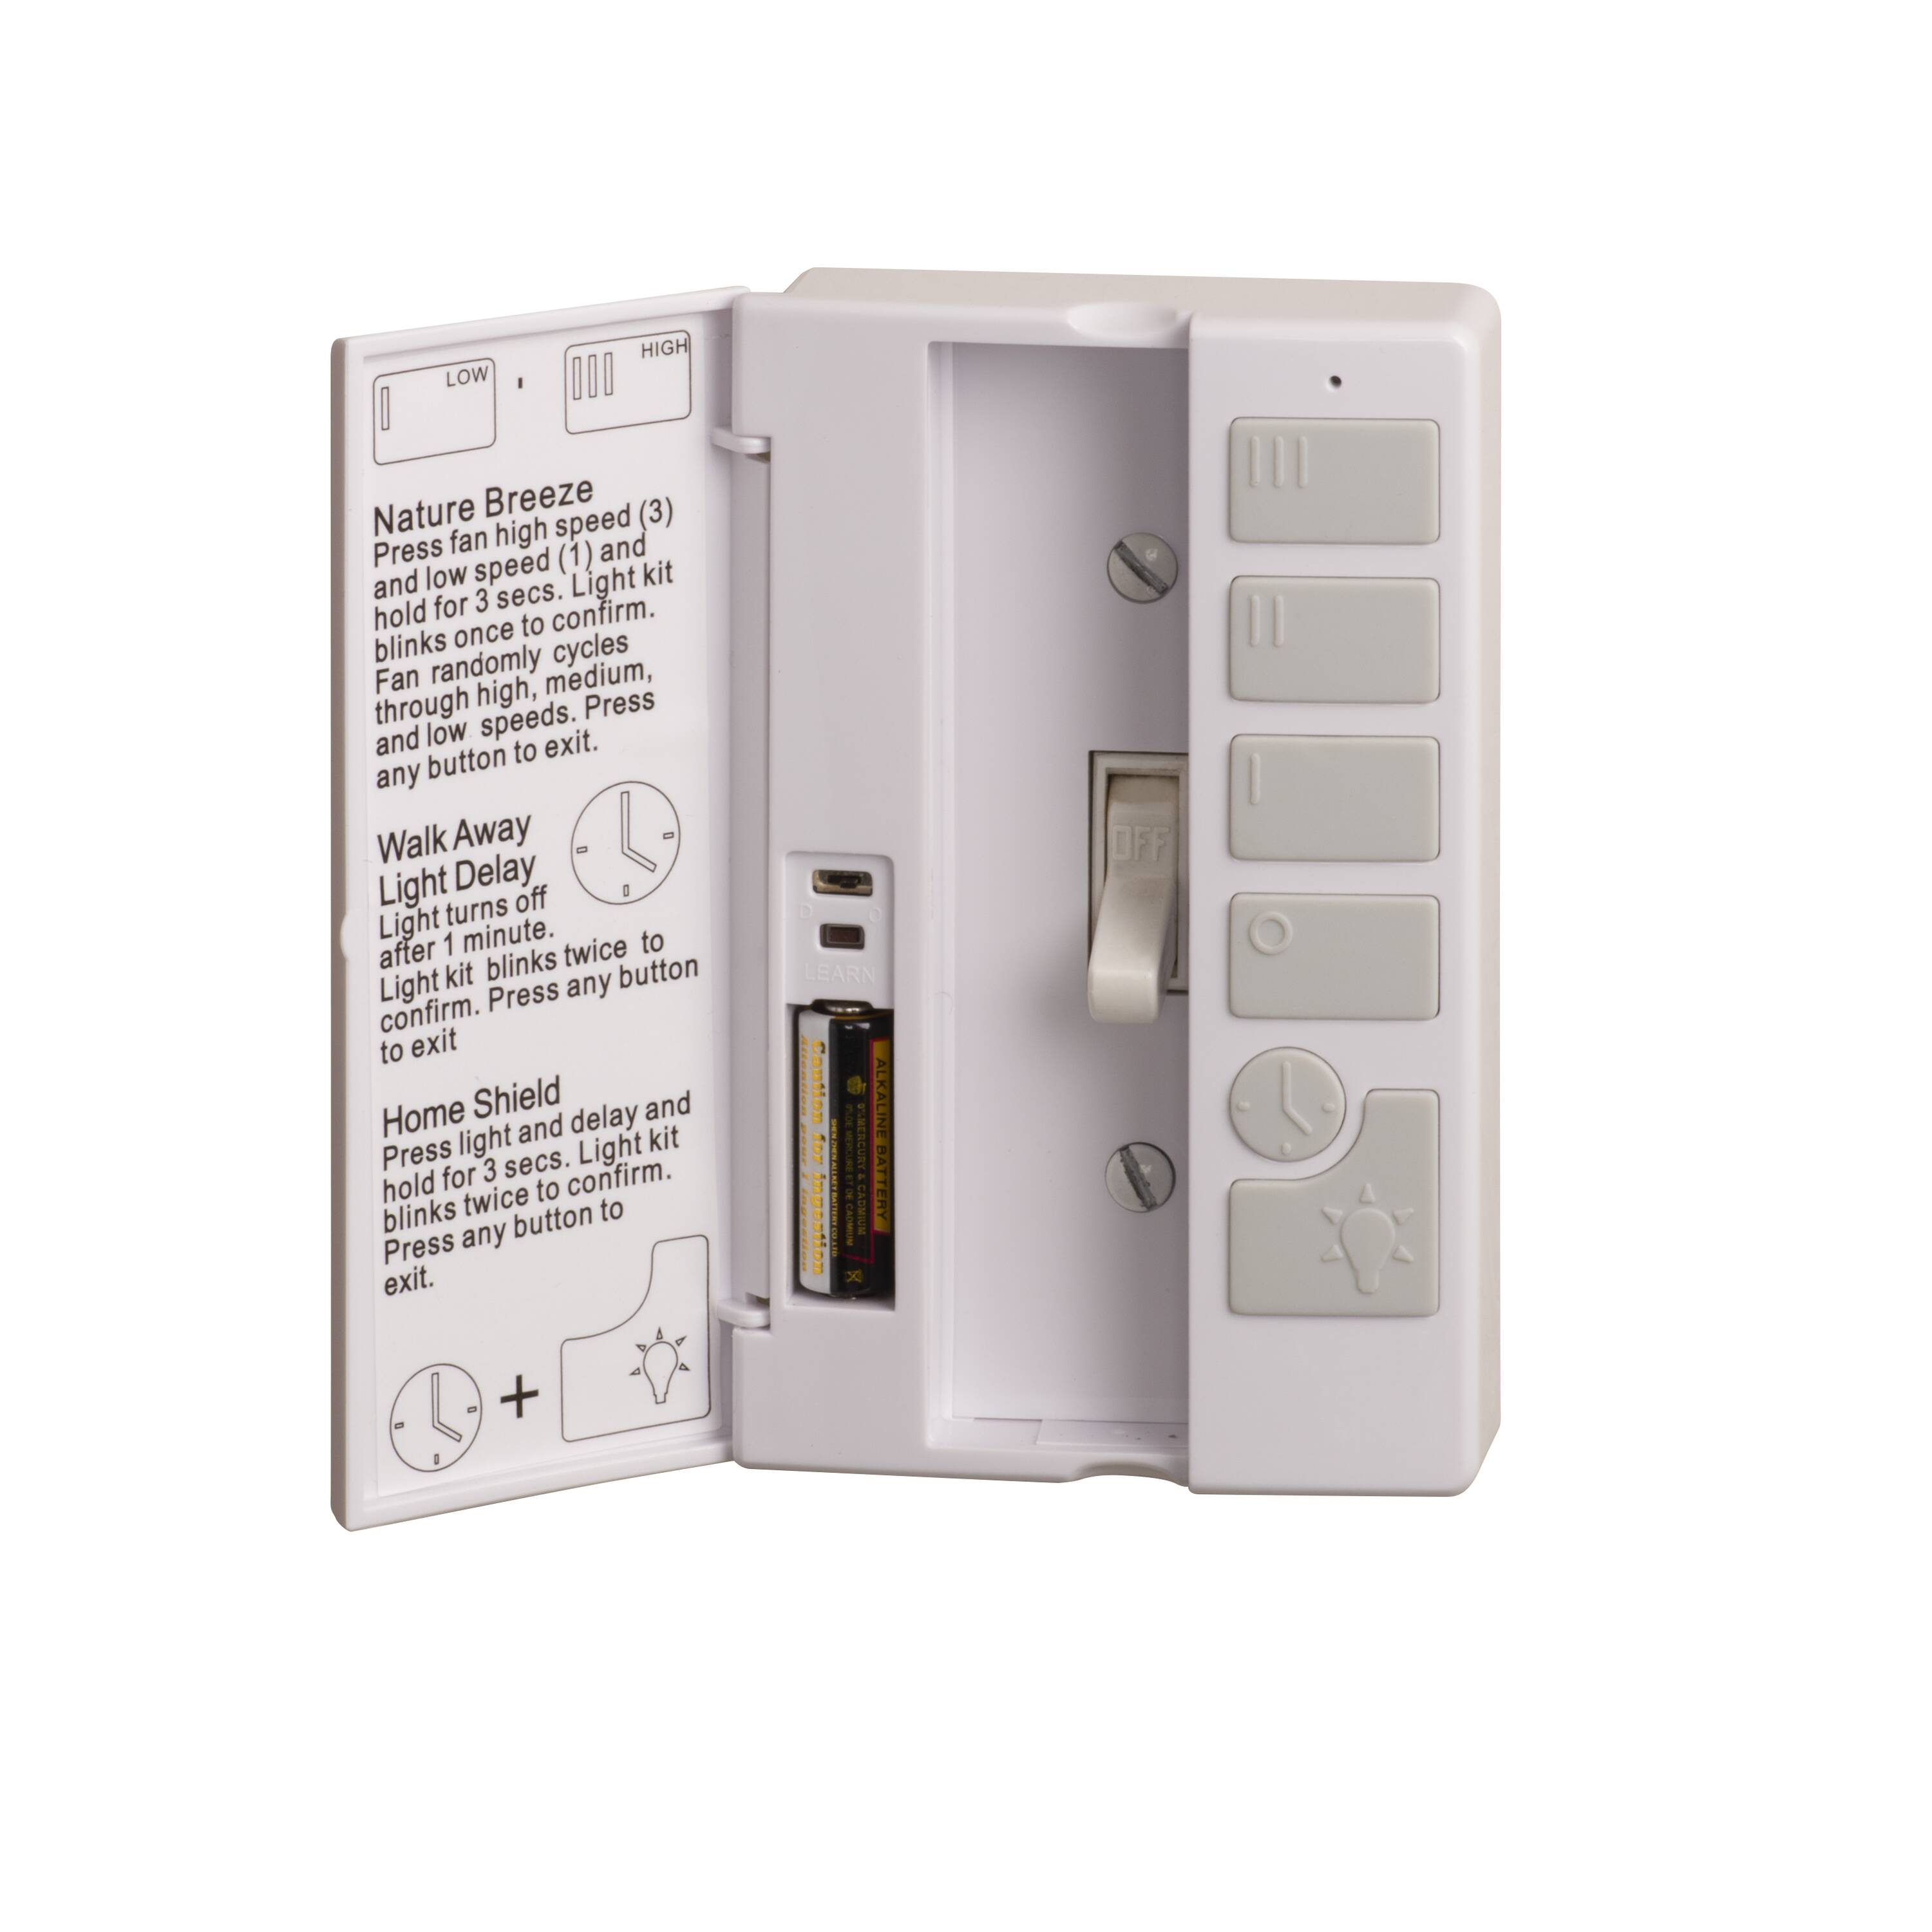 Duluck remote controller for 4 lights-Off/On and 1 fan-speed 0,1,2,3,4.  Elderly, kids and servants can easily operate with remote or manually with  wall switch like they are used to. Support Wi-Fi IR